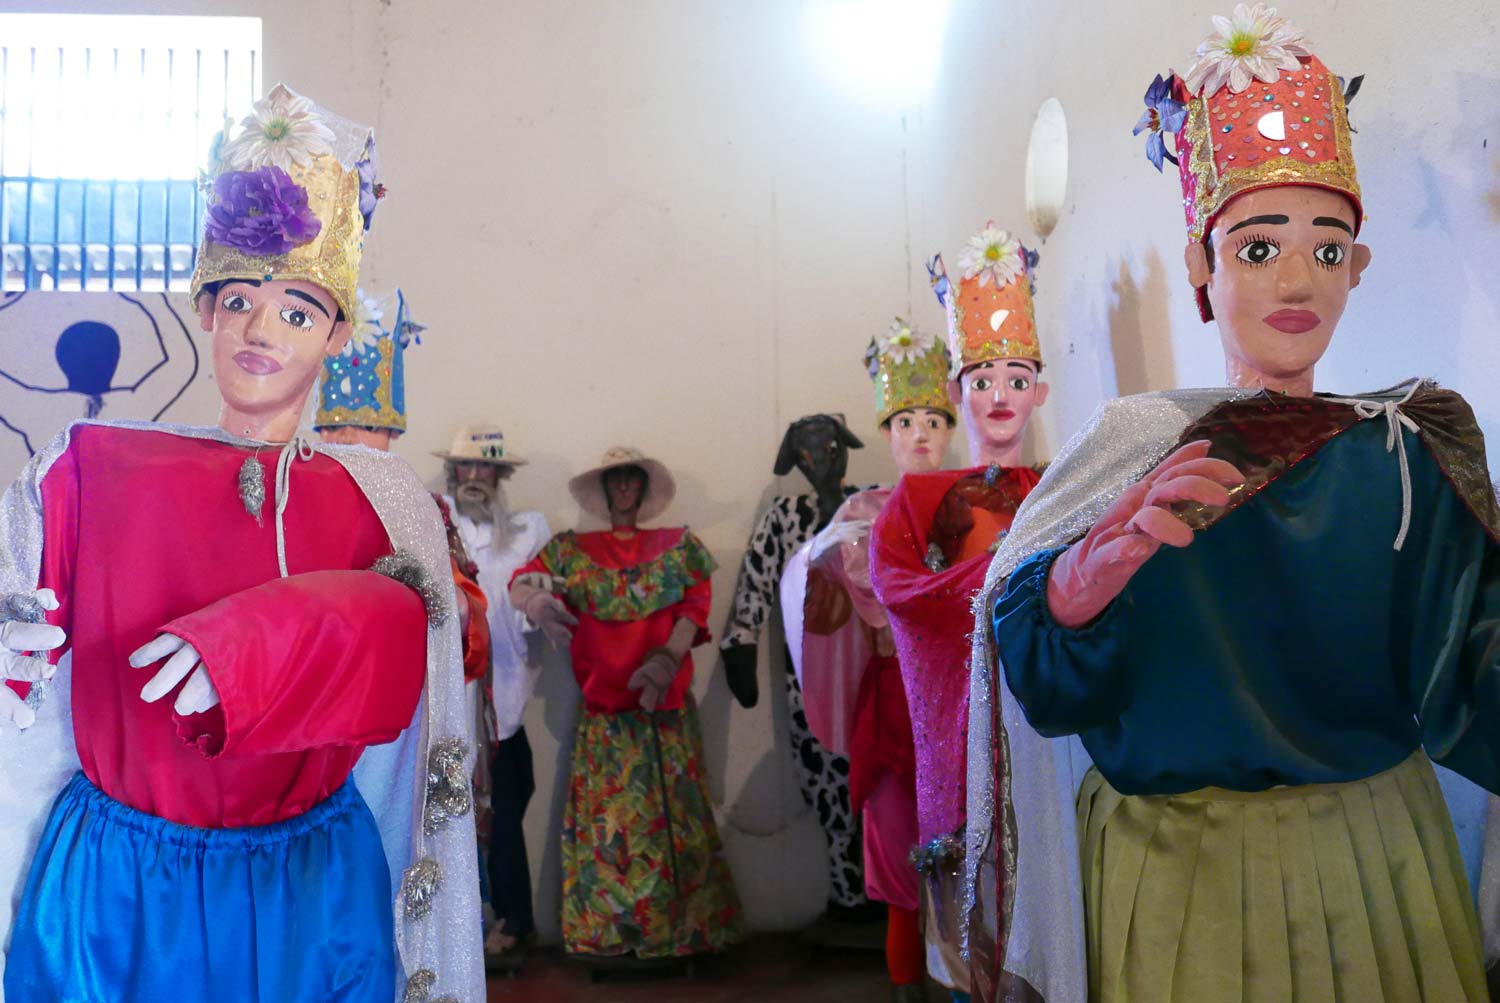 Puppets inside museum of Traditions and Legends in Leon, Nicaragua